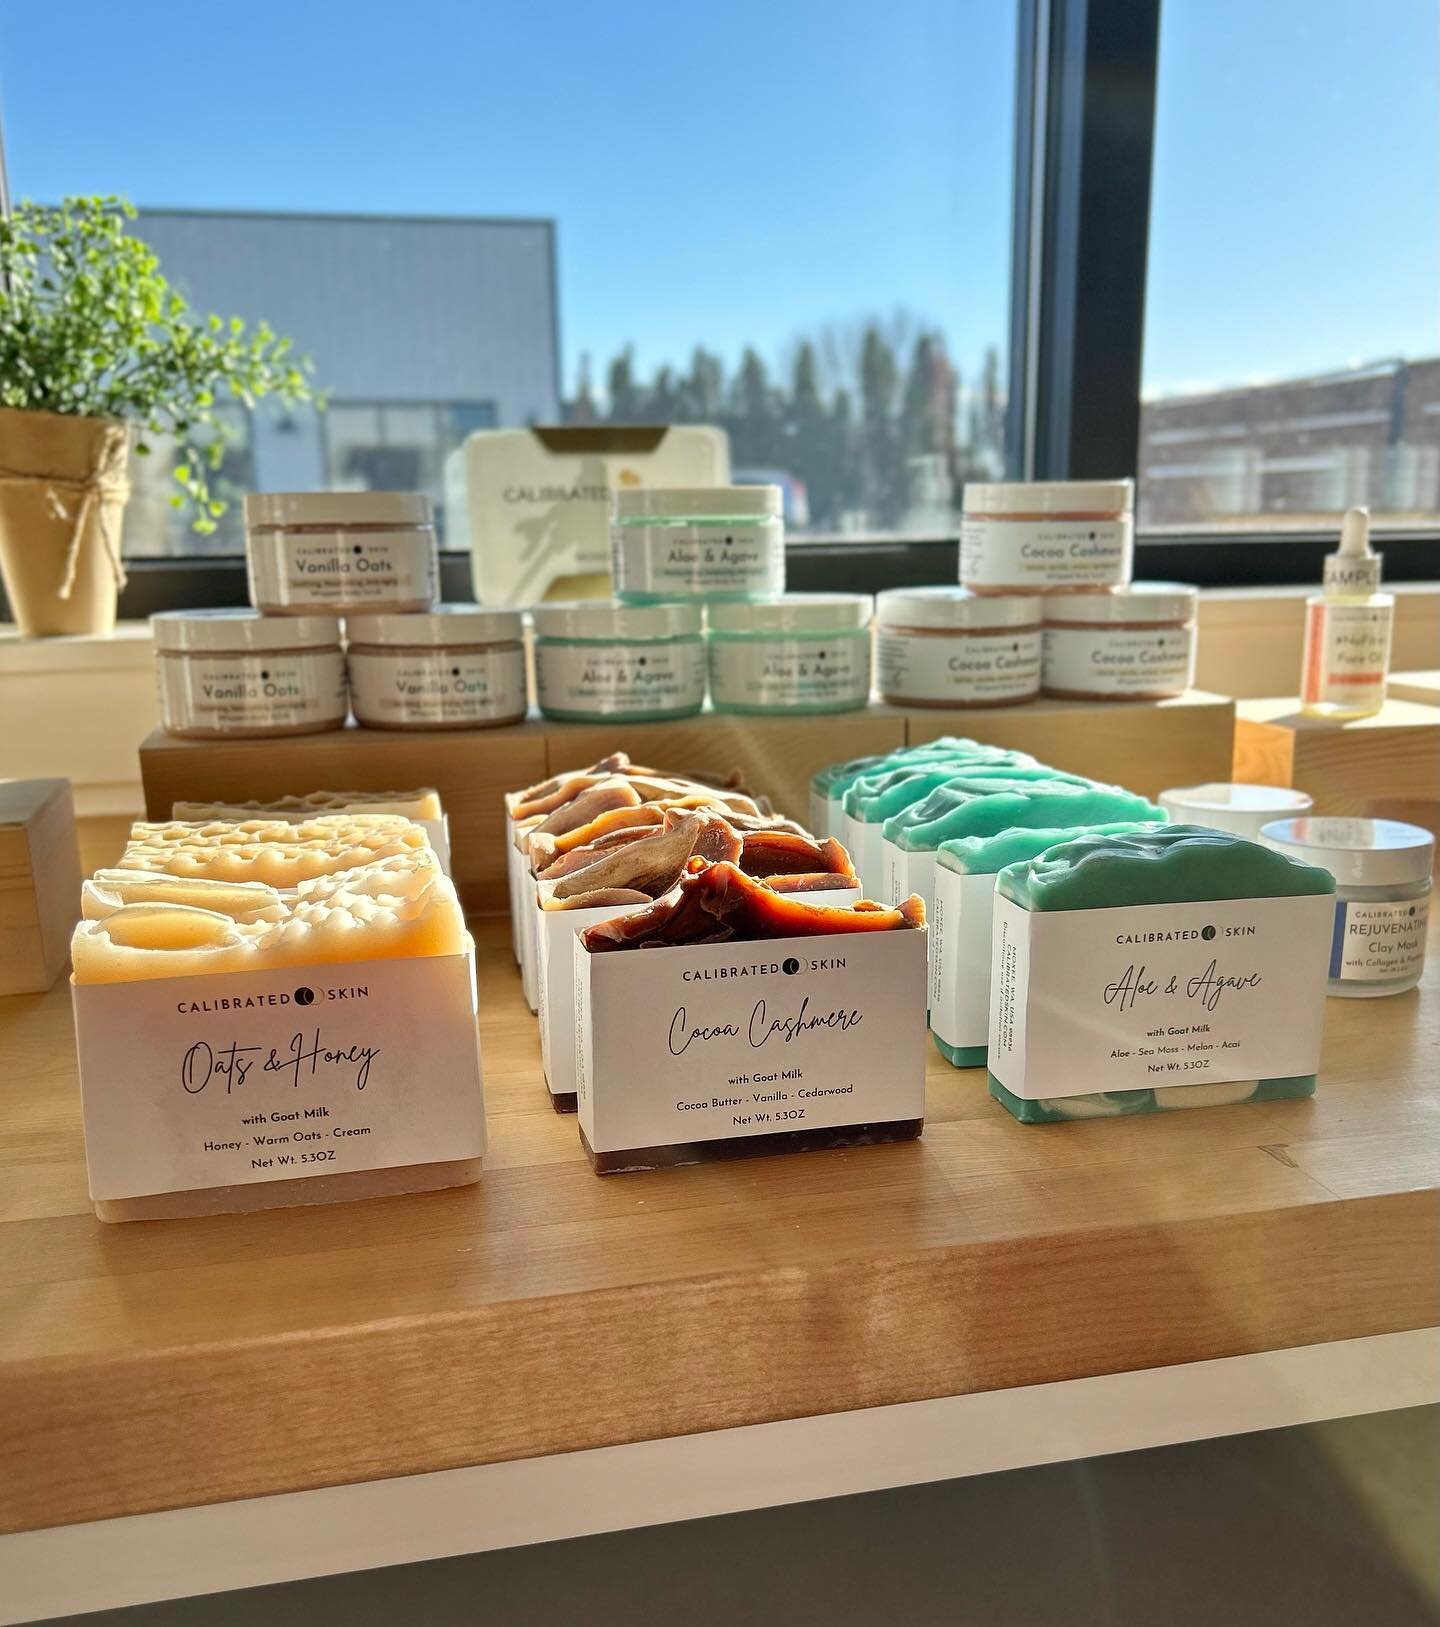 Calibrated Skin freshening up the shop with some luxurious scents in soaps, lotions and scrubs! Bring the spa home with these bath products today!